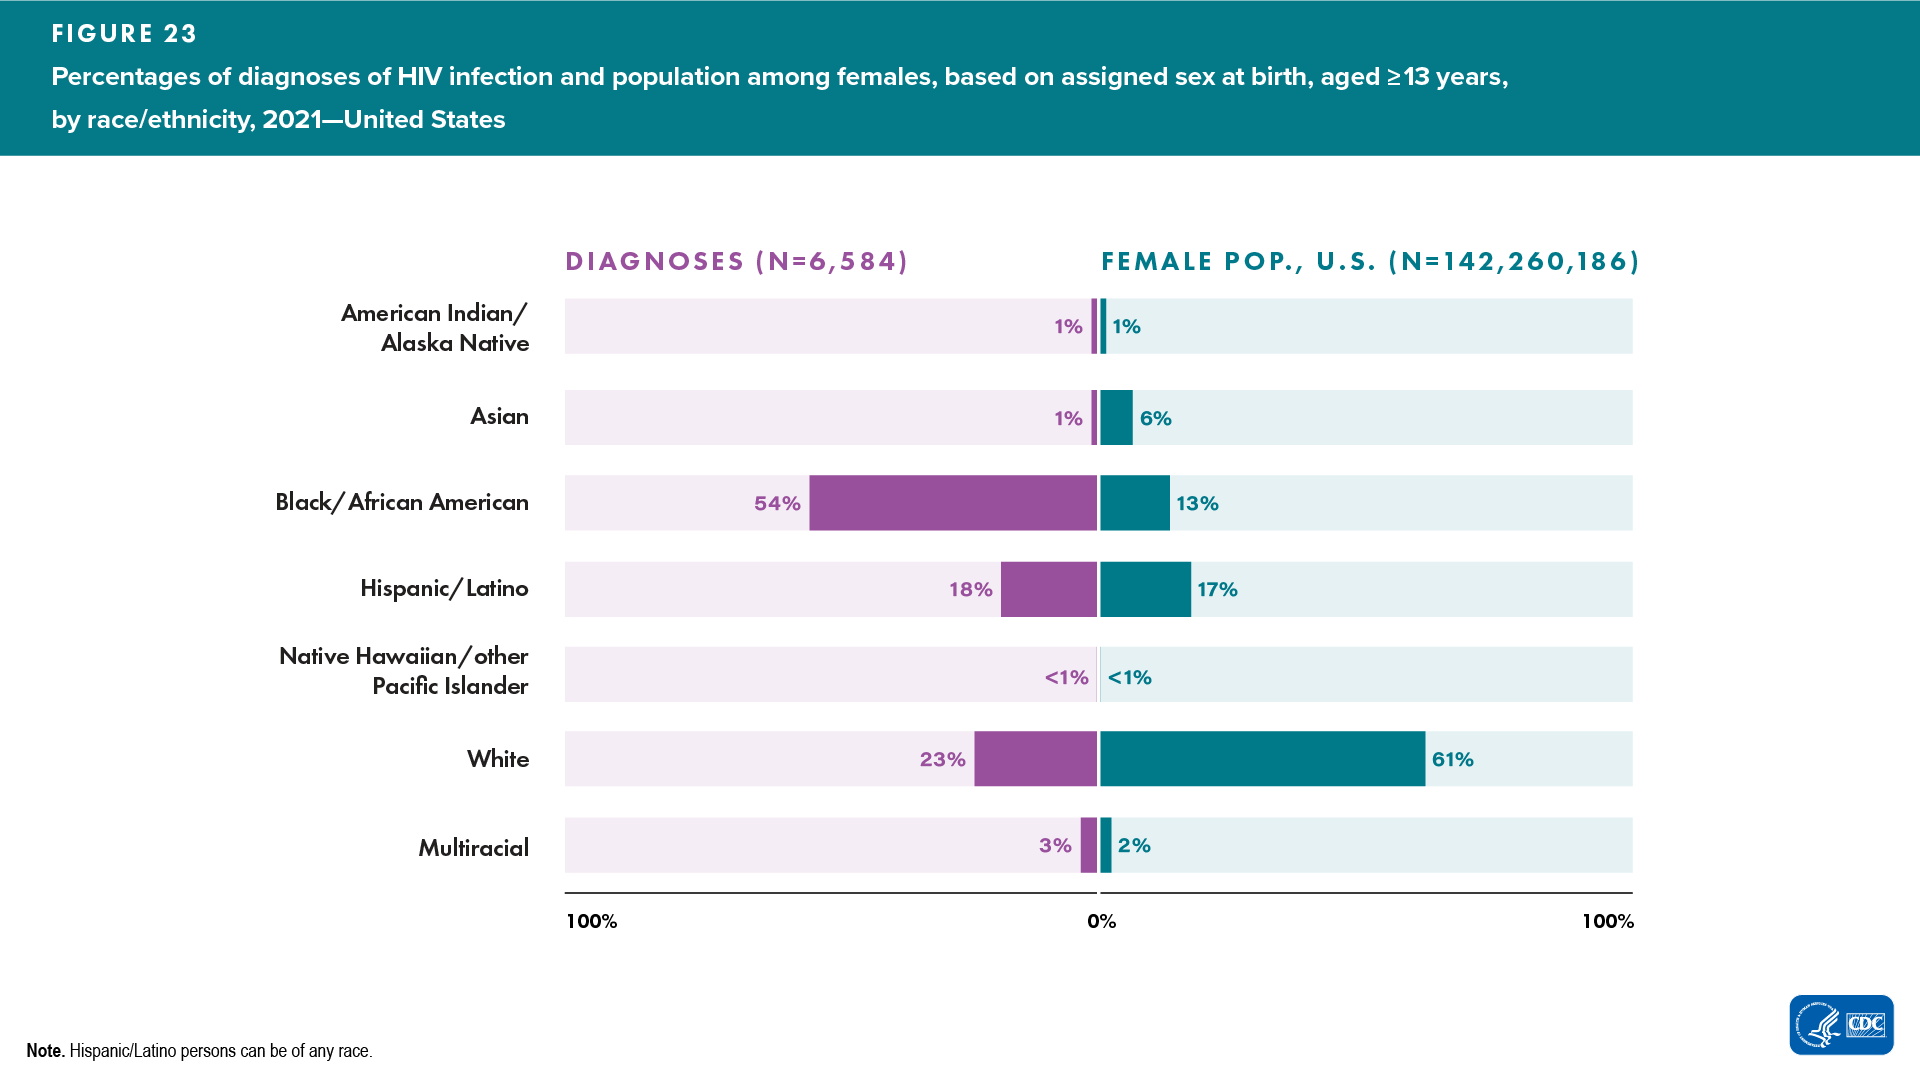 In 2021 in the United States, Black/African American females (assigned sex at birth) aged ≥ 13 years made up 13% of the female population, but HIV infection among this group accounted for 54% of diagnoses. White females (assigned sex at birth) aged ≥ 13 years made up 61% of the female population, and HIV infection among this group accounted for 23% of diagnoses. Hispanic/Latino females (assigned sex at birth) aged ≥ 13 years made up 17% of the female population, and HIV infection among this group accounted for 18% of diagnoses.